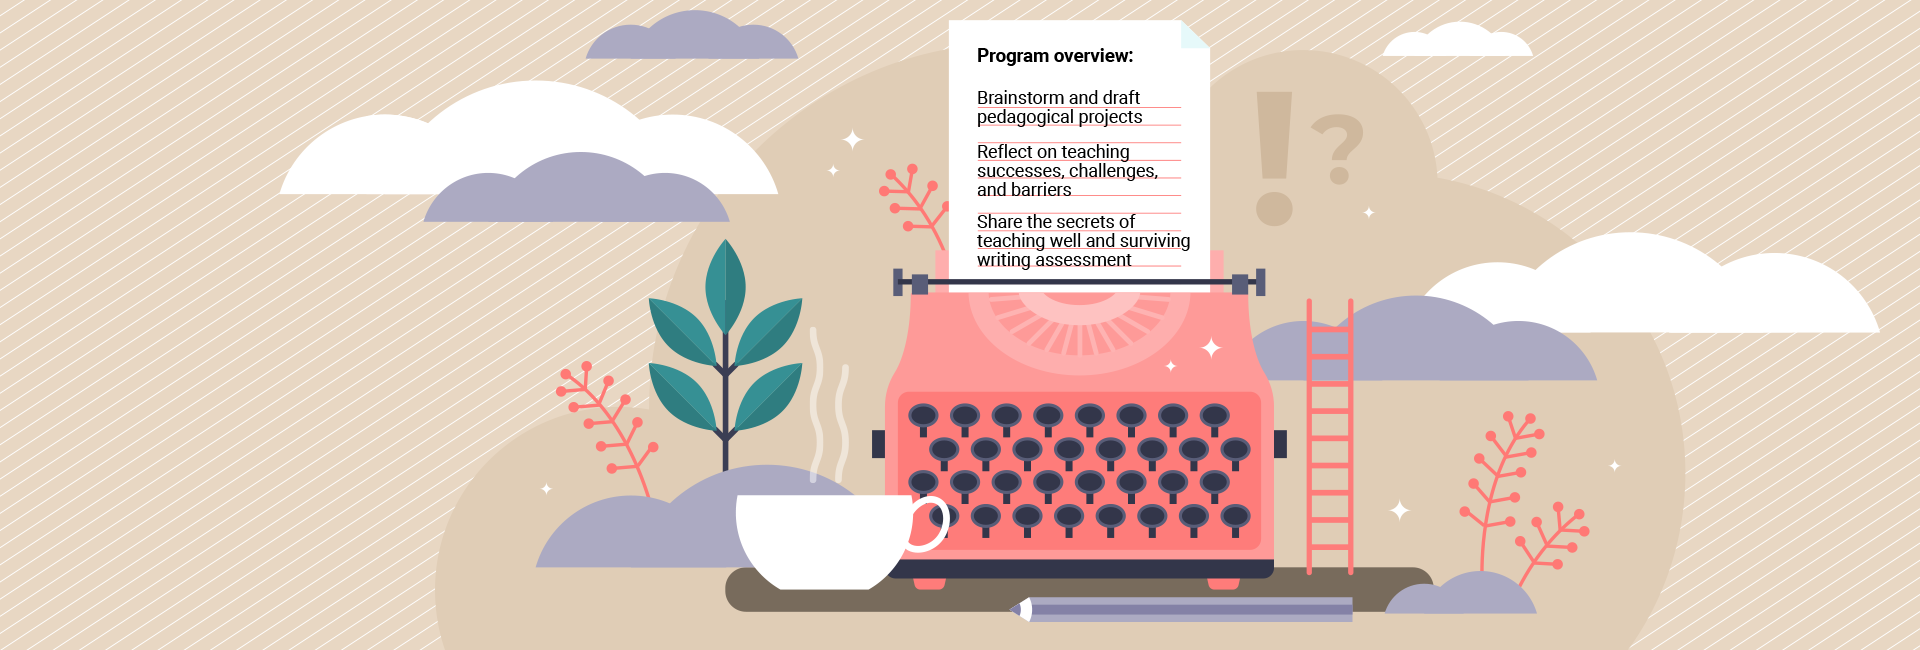 A large pink typewriter on fantasty ground surface with a cup of steaming coffee and plants and a ladder around it. In the typewriter is a ruled sheet of paper with the words: "Program overview: Brainstorm and draft pedagogical project; Reflect on teaching successes, challenges, and barriers; Share the secrets of teaching well and surviving writing assessment."